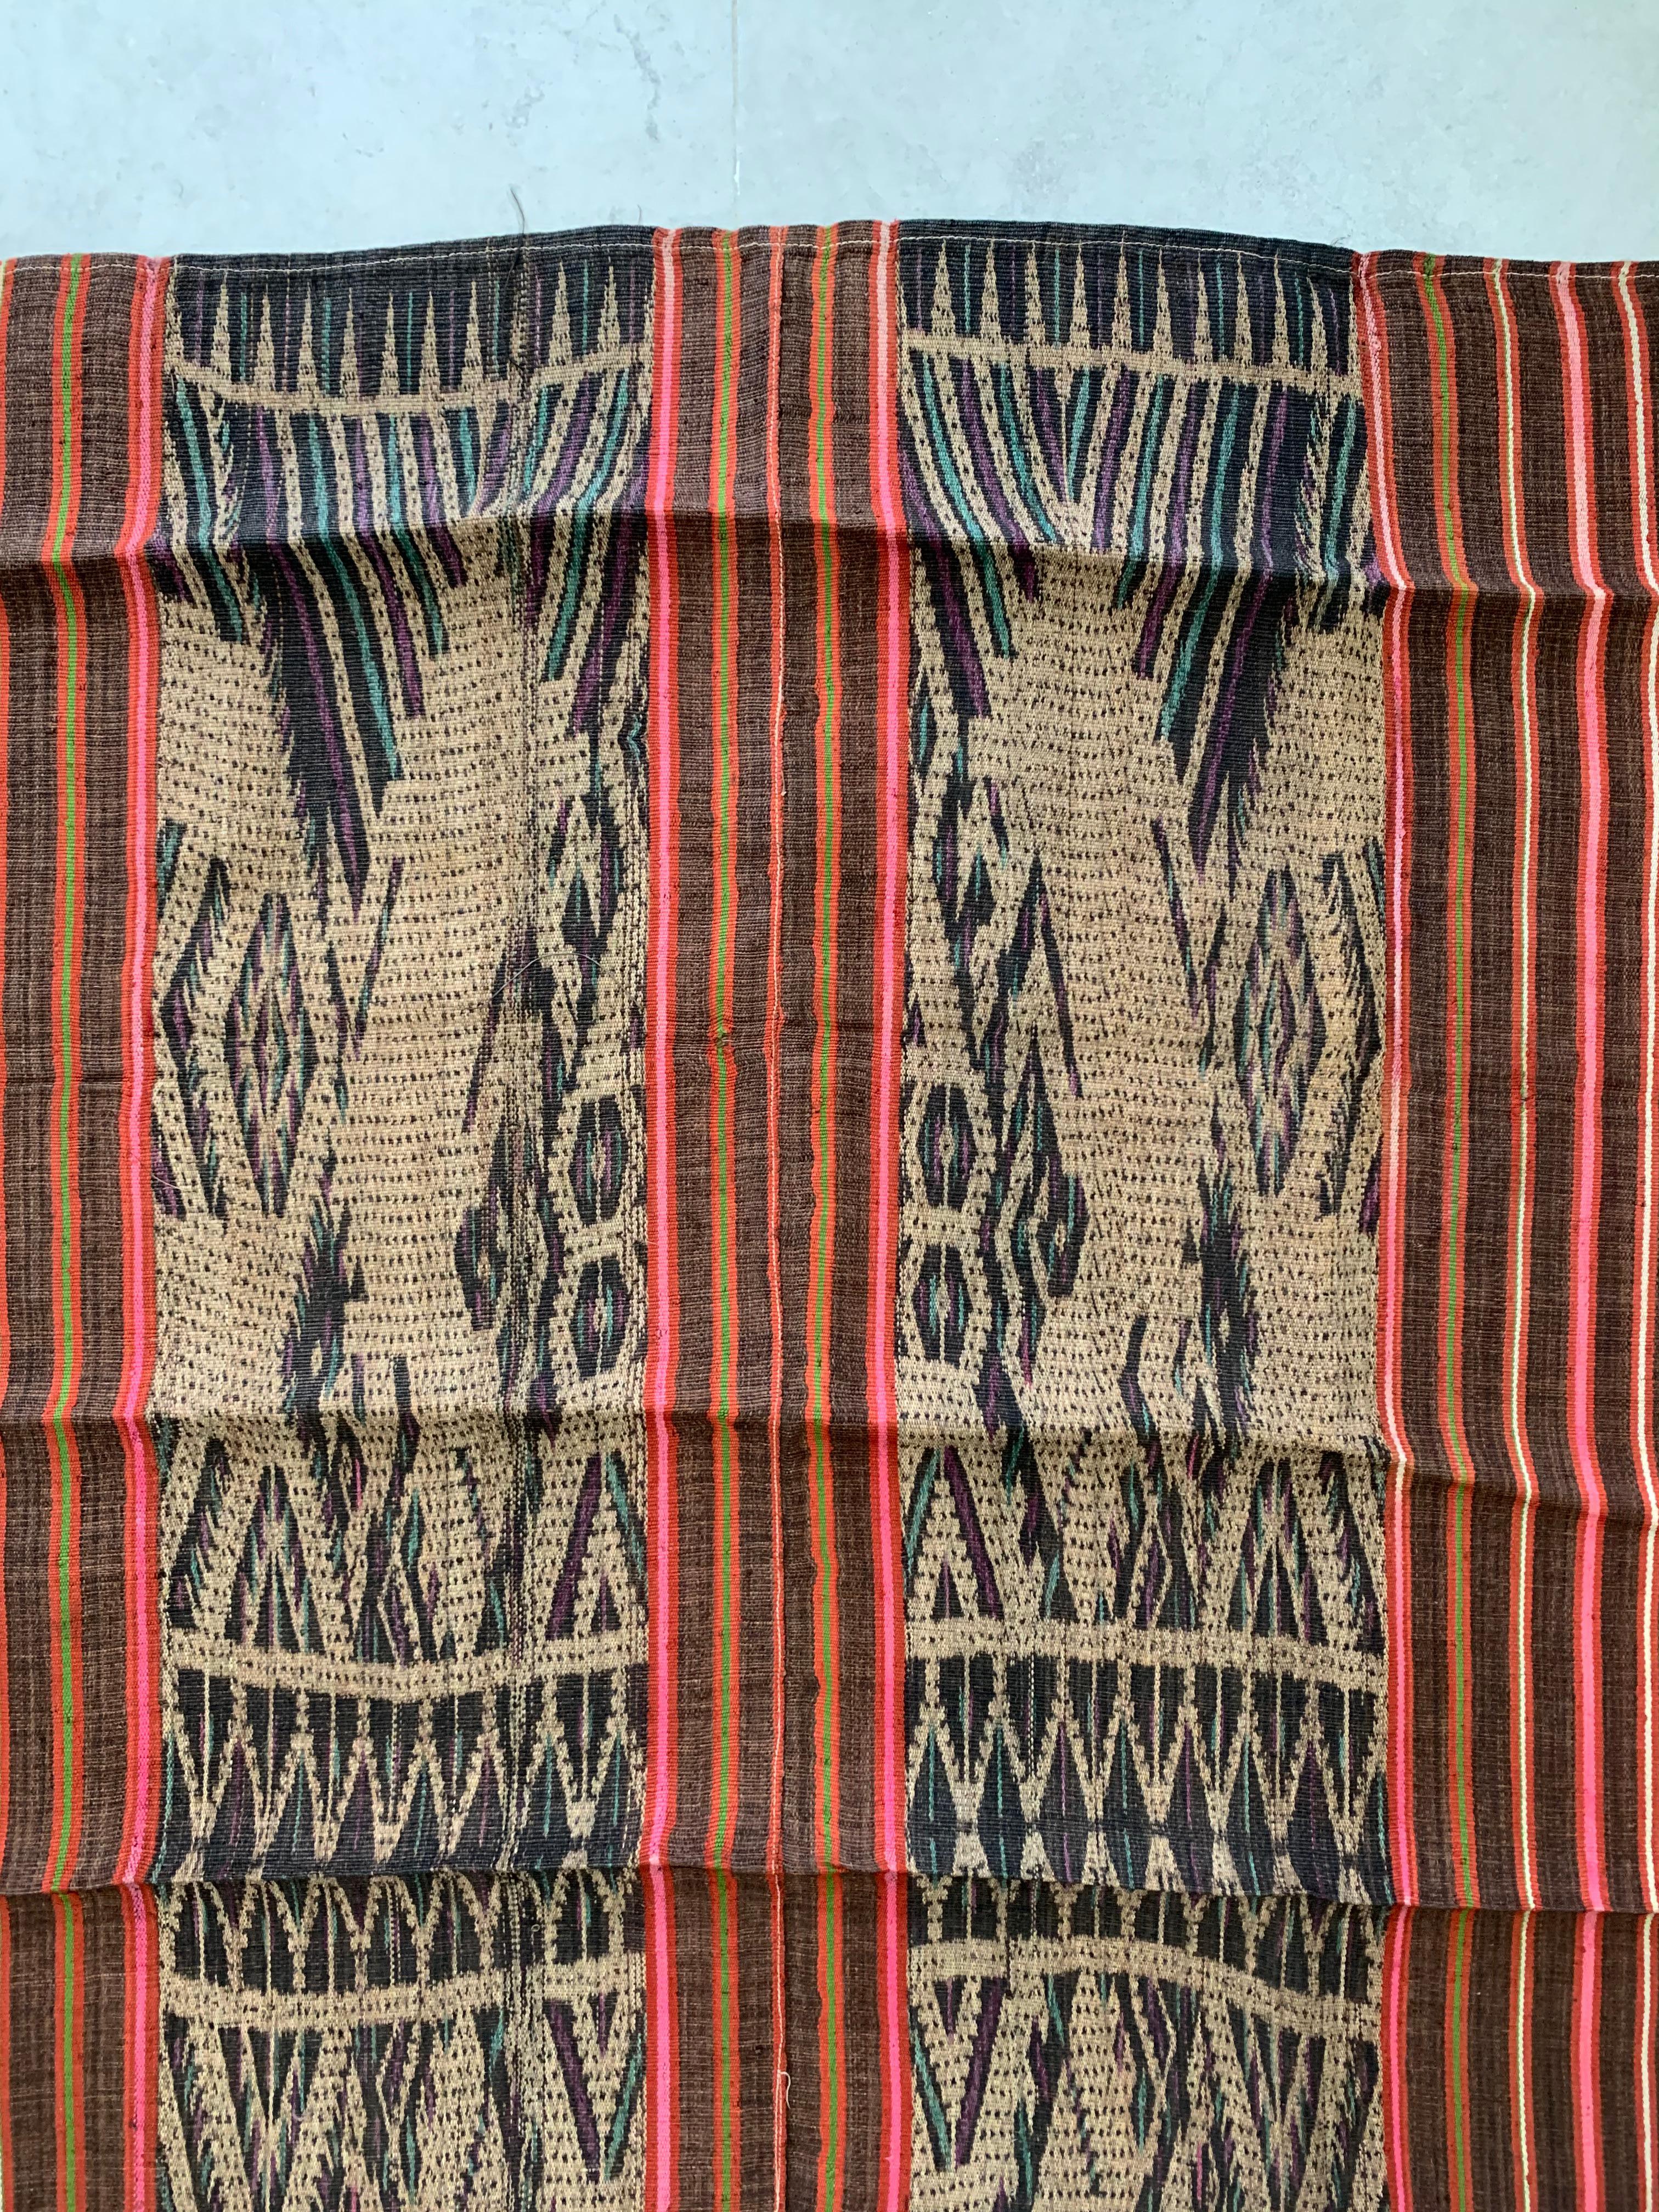 This Ikat textile originates from the Island of Kalimantan, Indonesia. It is hand-woven using naturally dyed yarns via a method passed on through generations amid the Dayak Tribes scattered throughout the island. It features a stunning orange, pink,